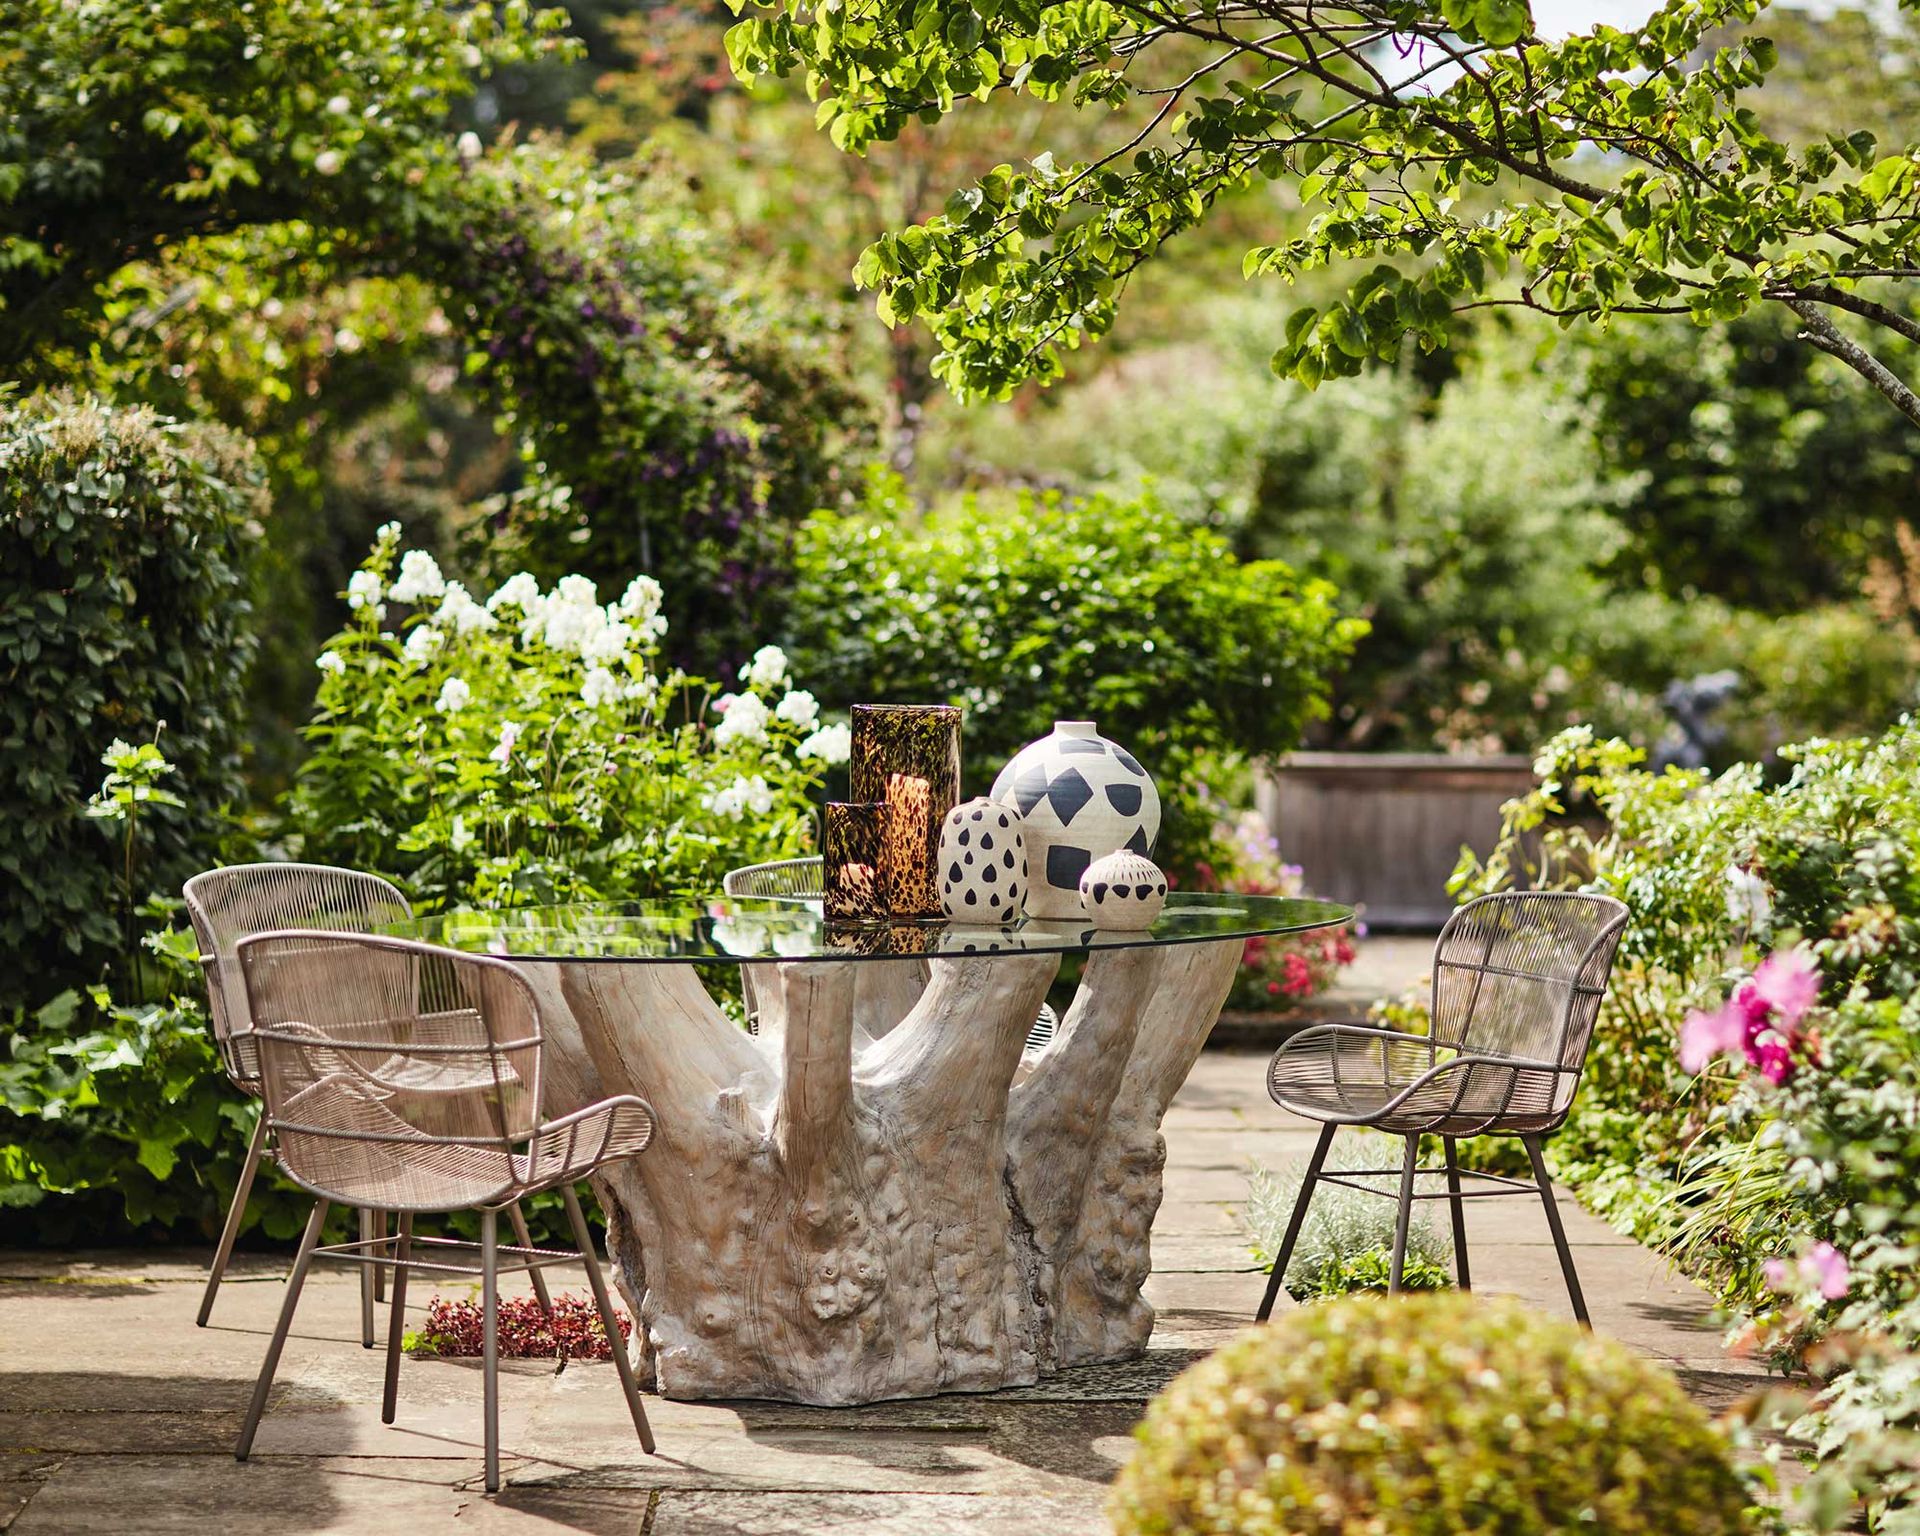 Patio furniture ideas: 18 on-trend designs for stylish outdoor living